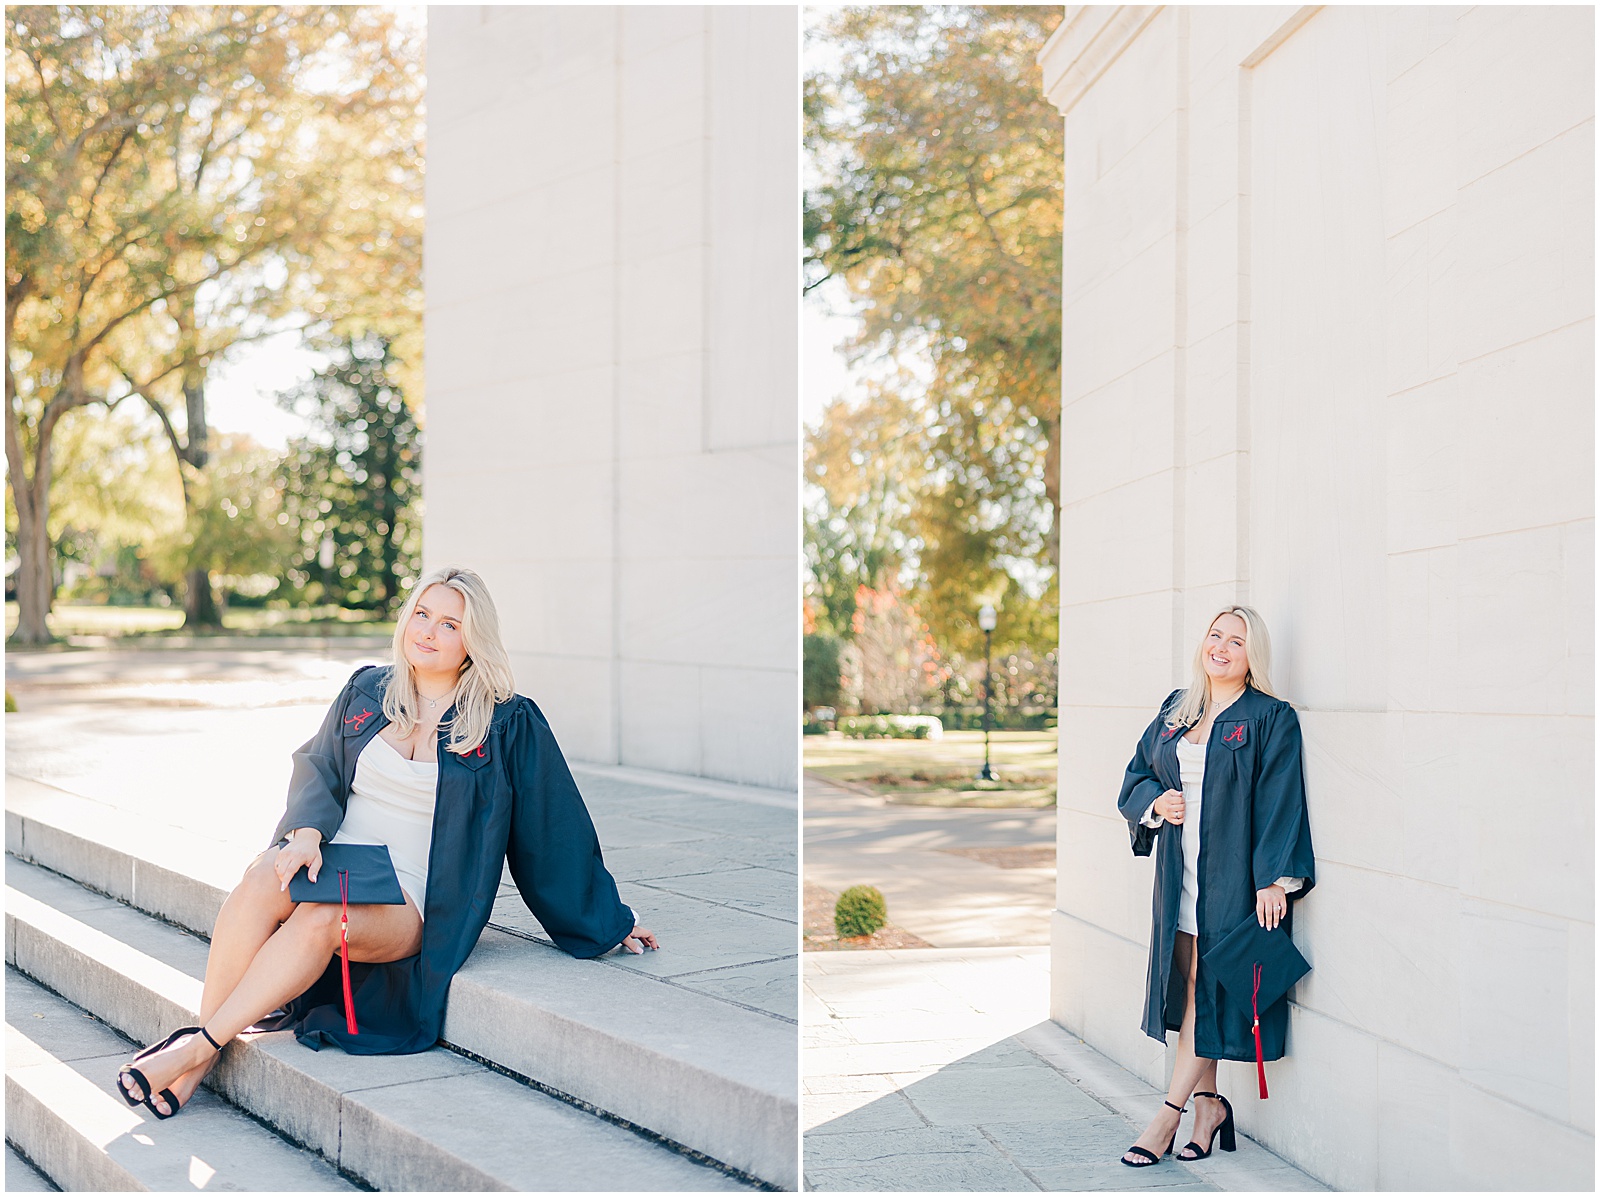 Fall graduation portraits at the University of Alabama in front of Denny Chimes